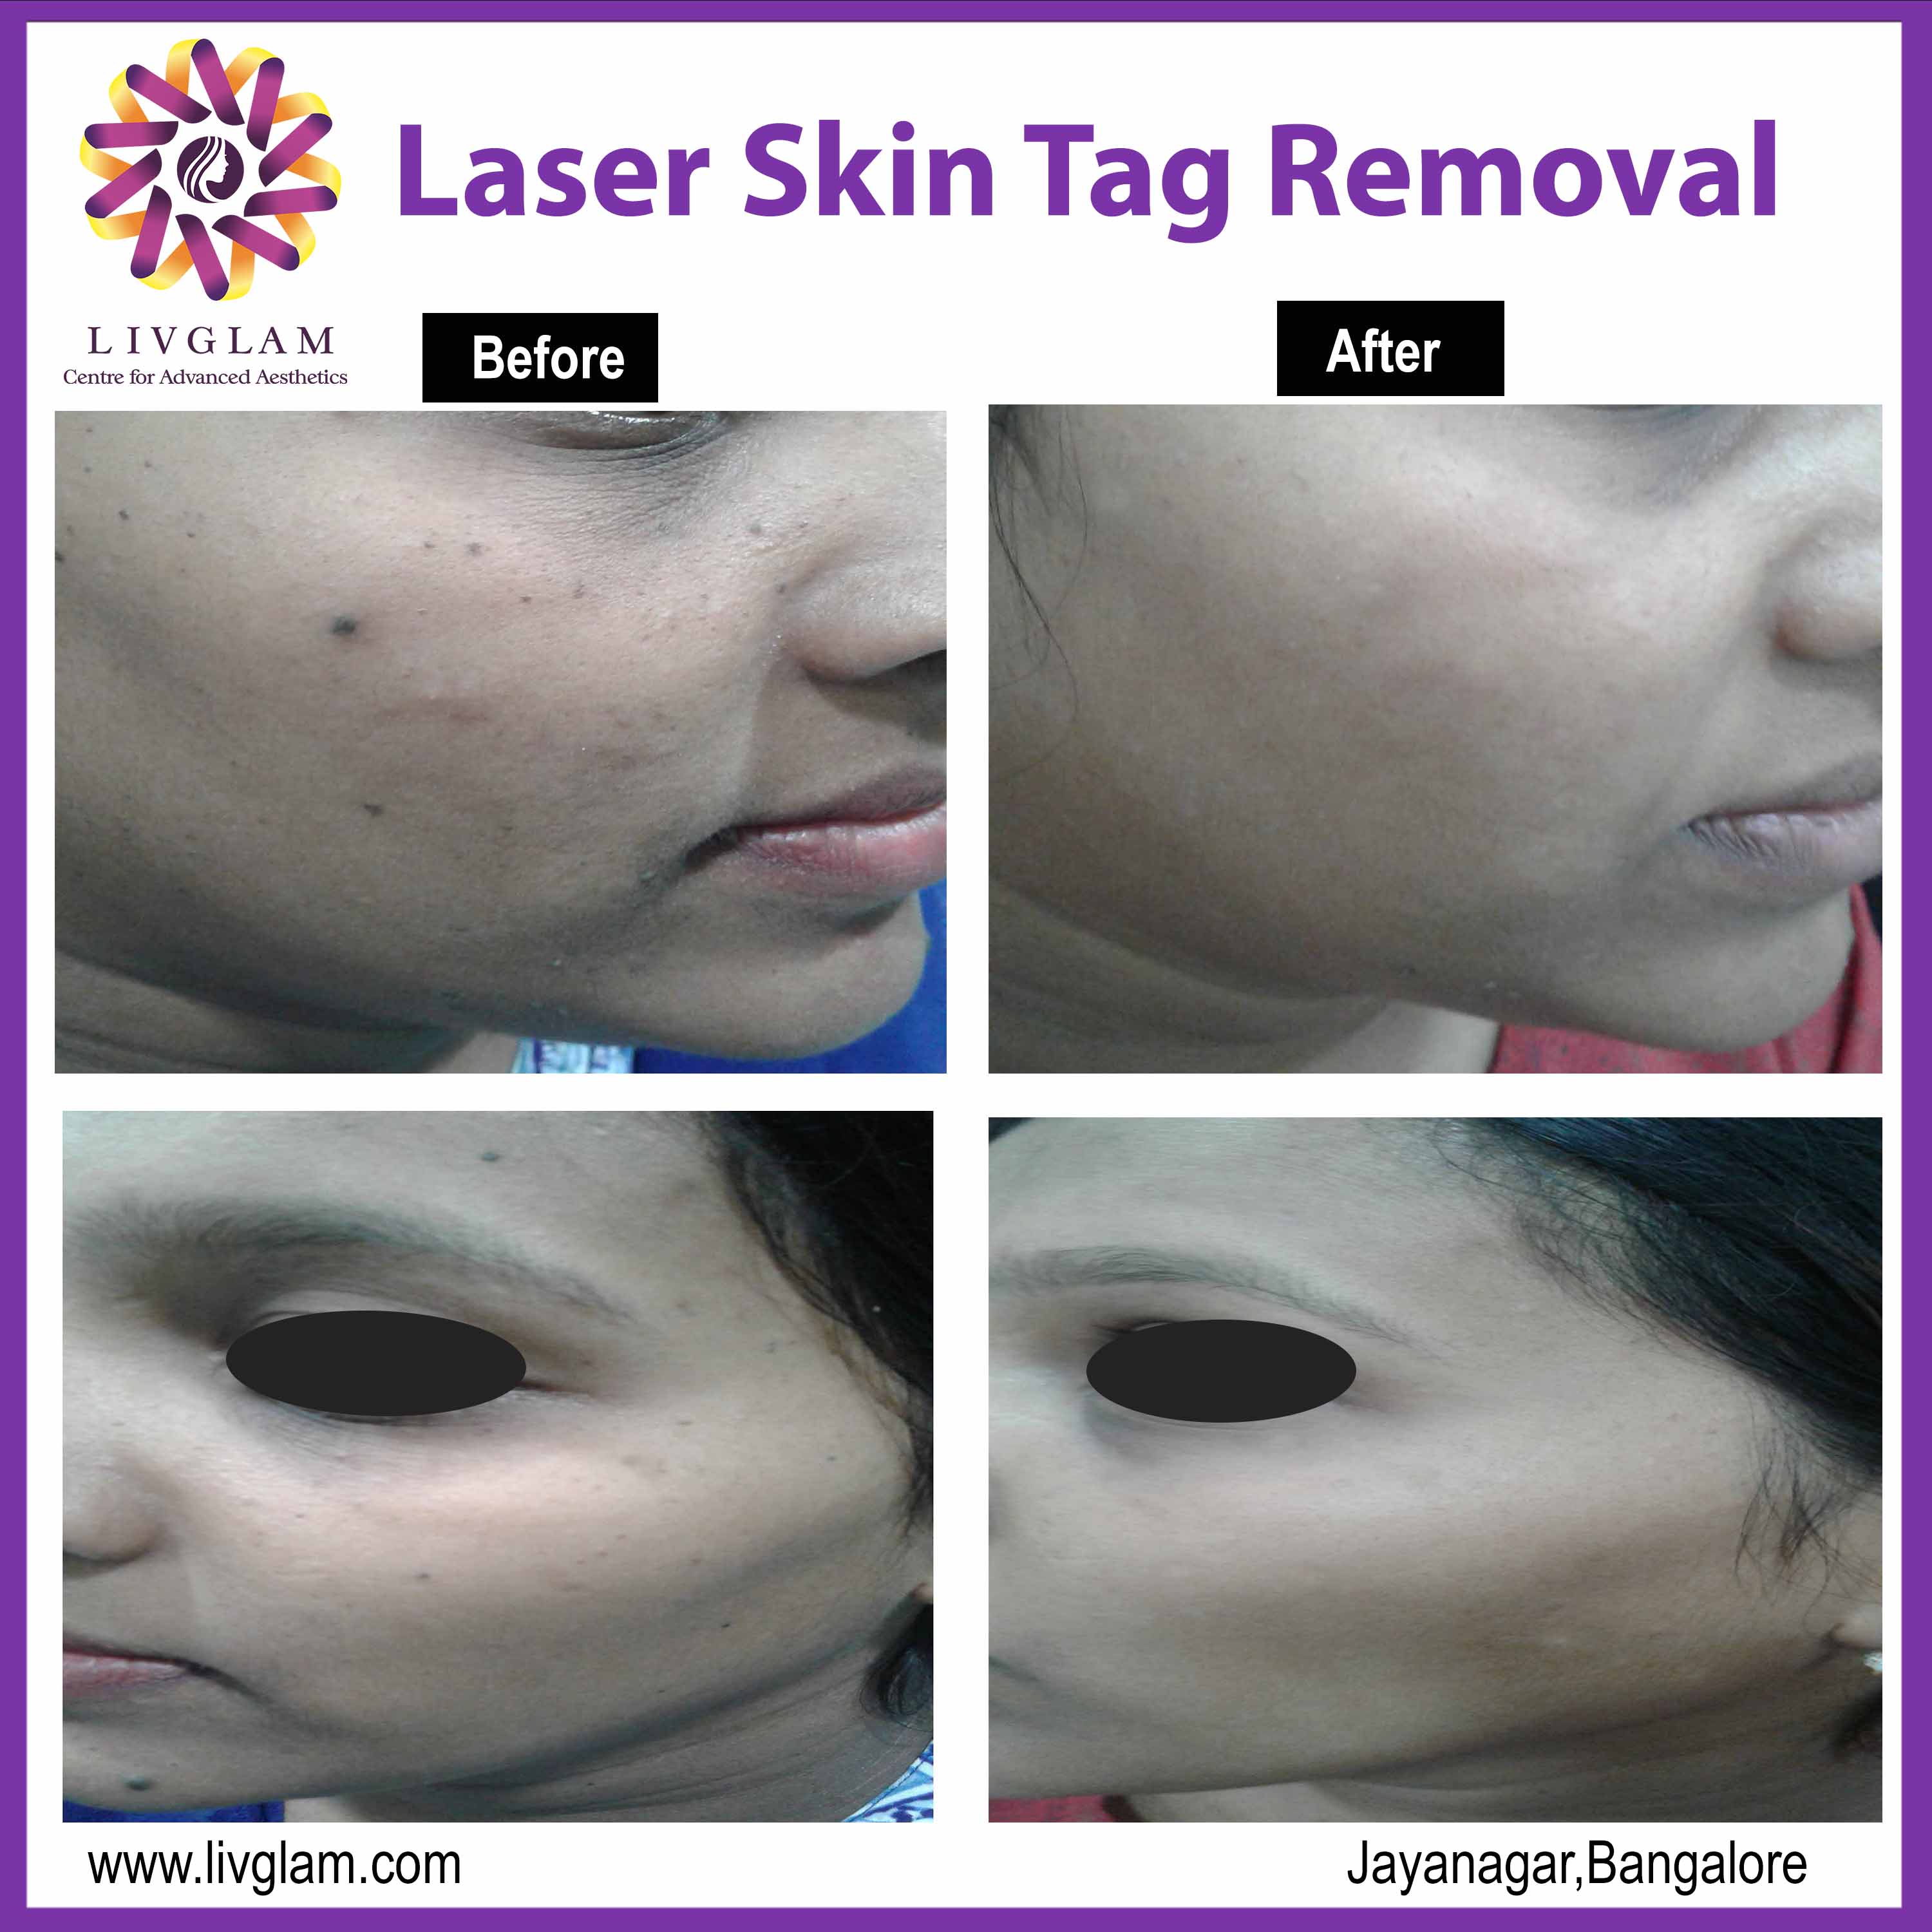 Laser skin tag removal cost in Bangalore